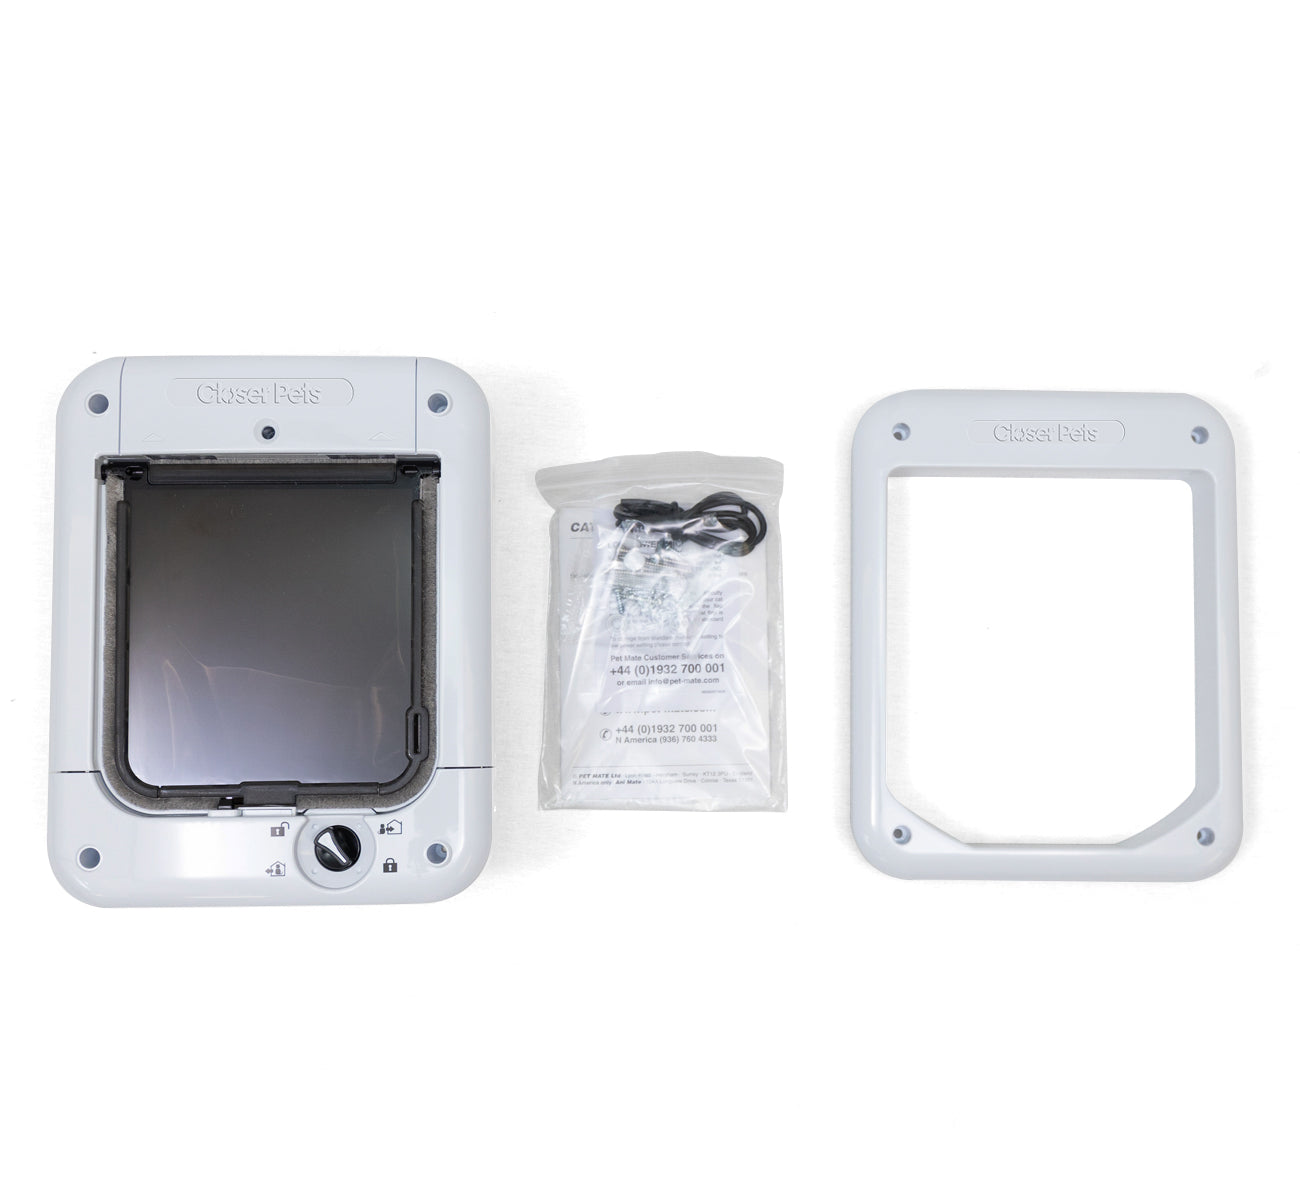 Closer Pets Microchip-activated Weatherproof Flap/Door with Manual Lock – White (CP360W)